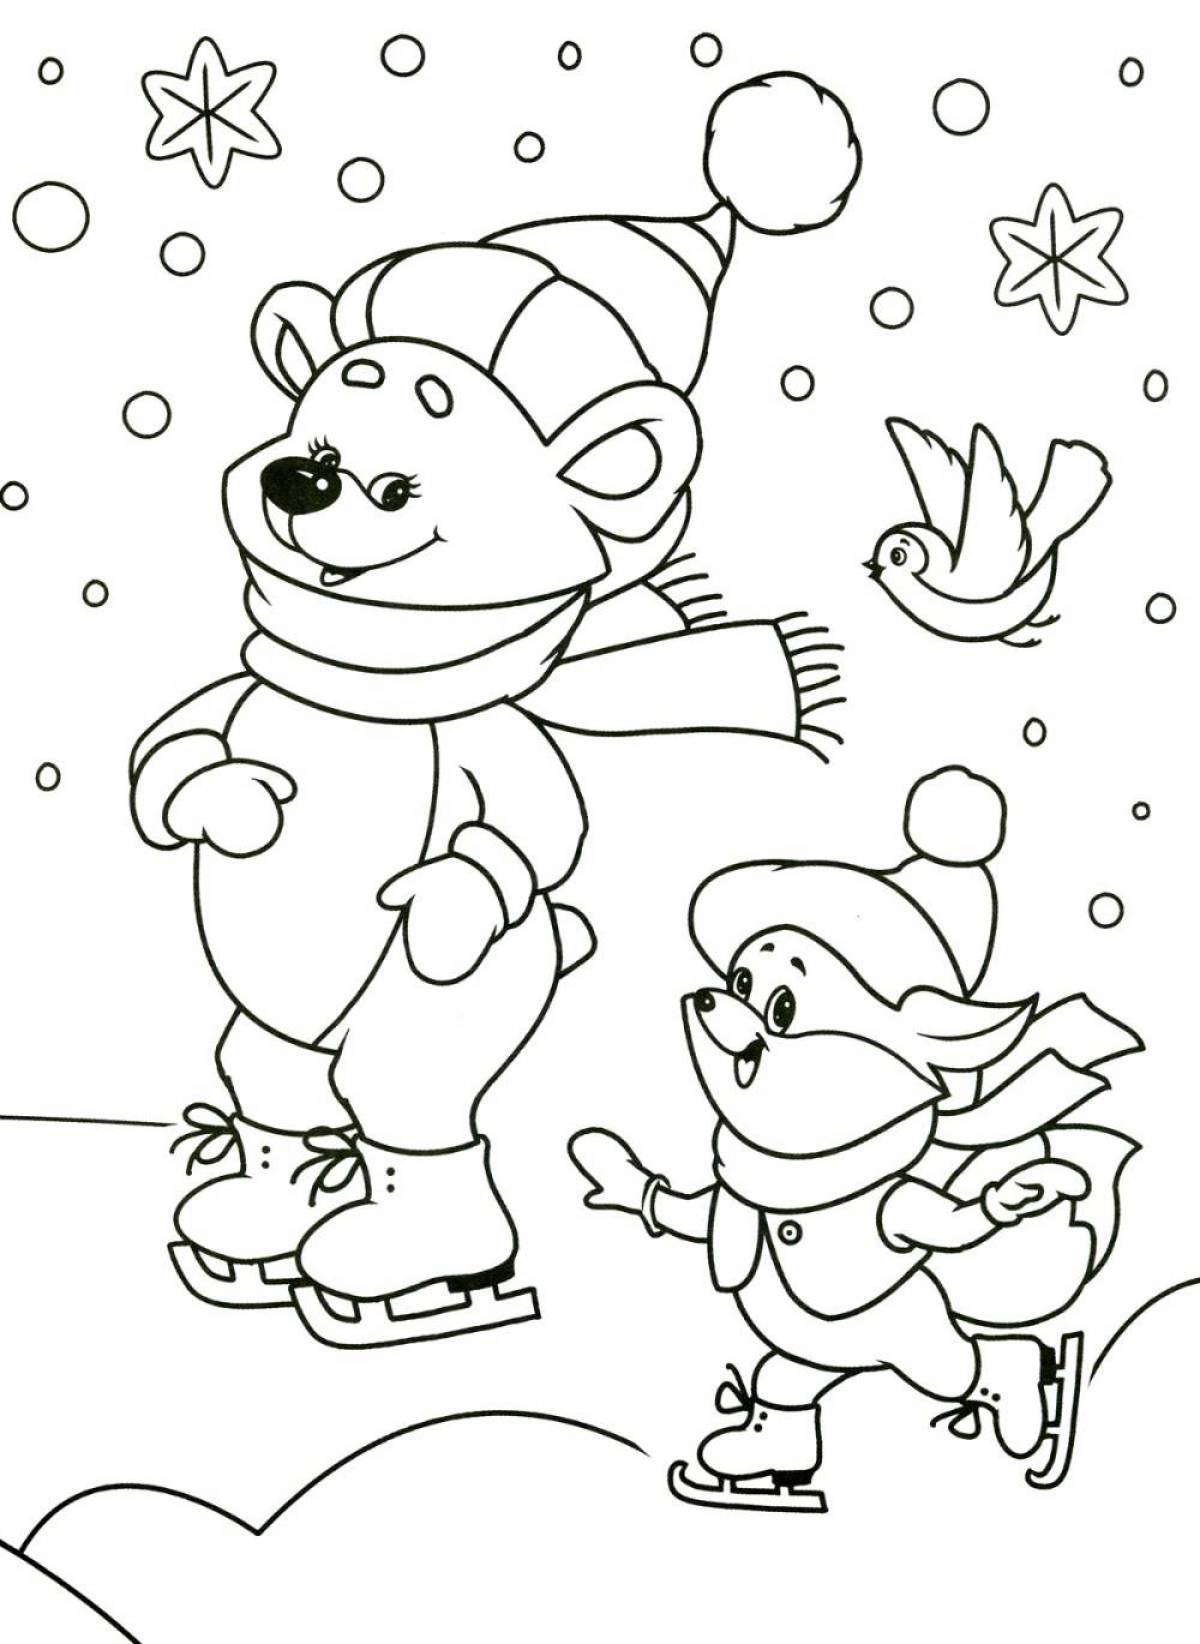 Inviting winter coloring book for children 4-5 years old